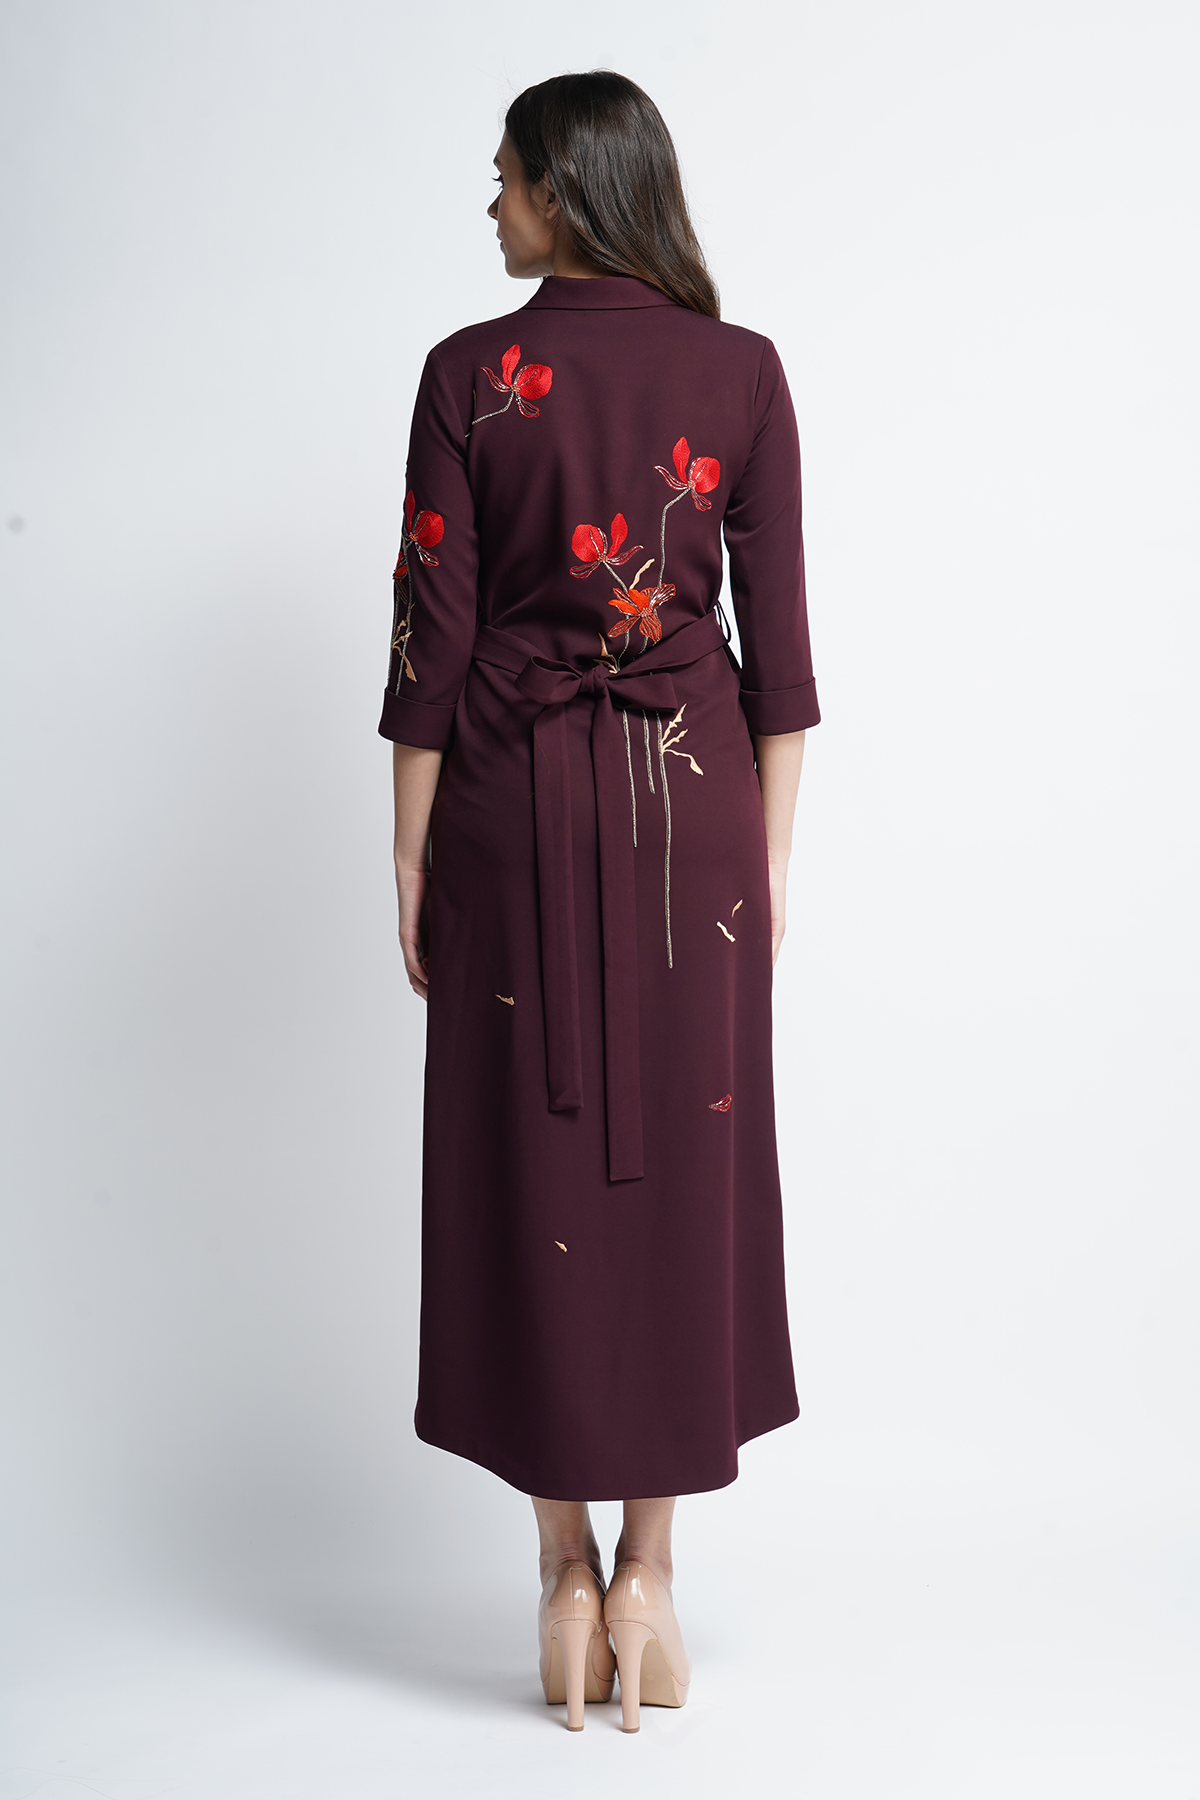 Blooming Flower Long Shirt Dress With Leather Belt